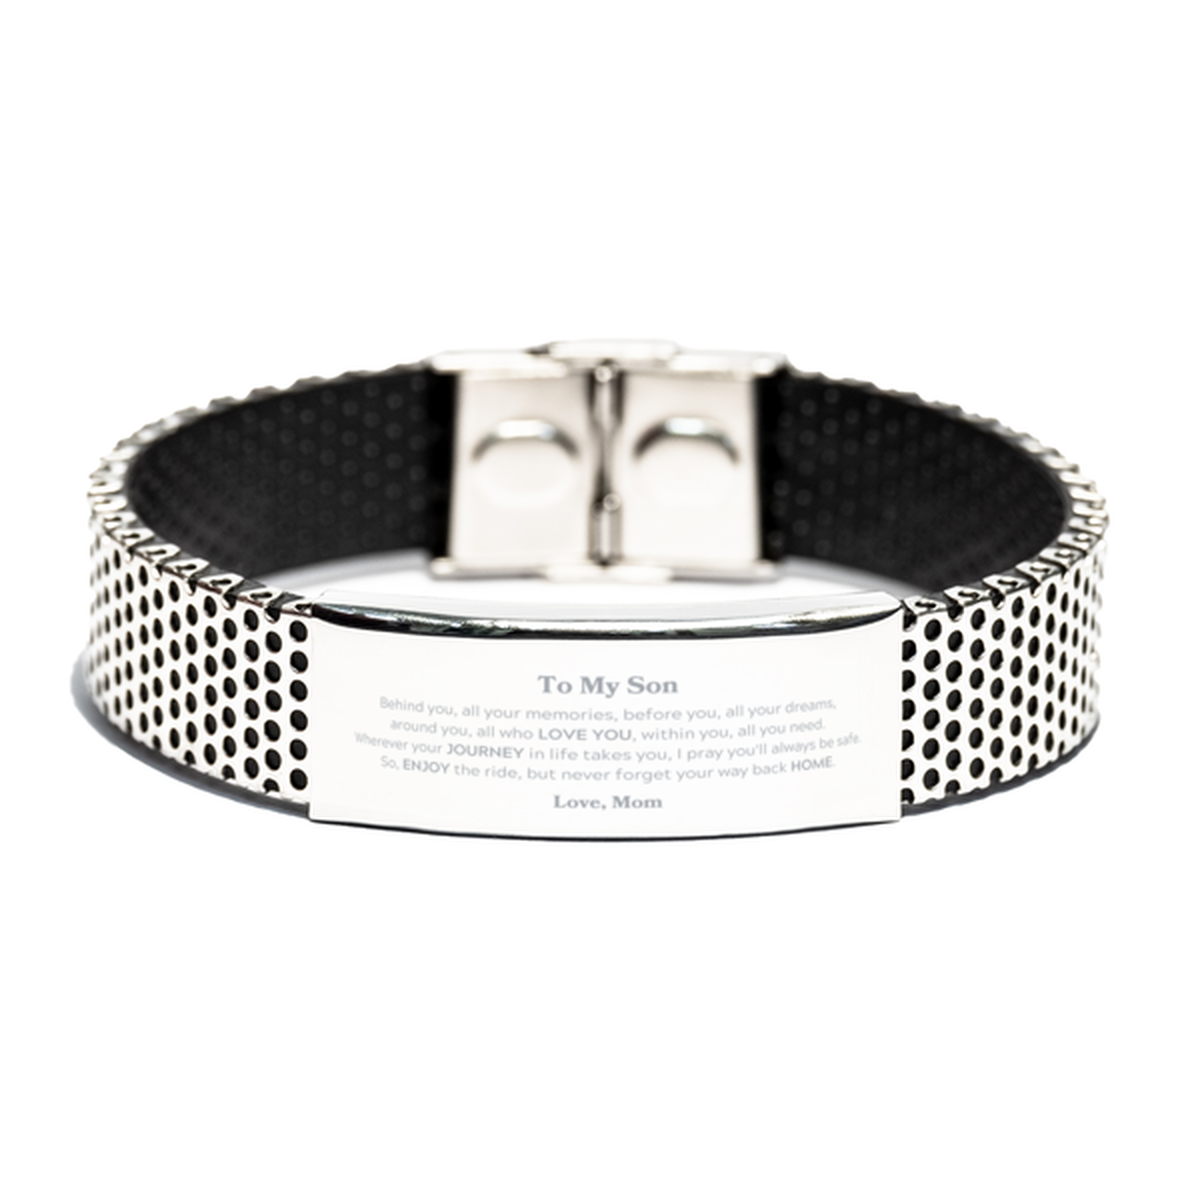 To My Son Graduation Gifts from Mom, Son Stainless Steel Bracelet Christmas Birthday Gifts for Son Behind you, all your memories, before you, all your dreams. Love, Mom